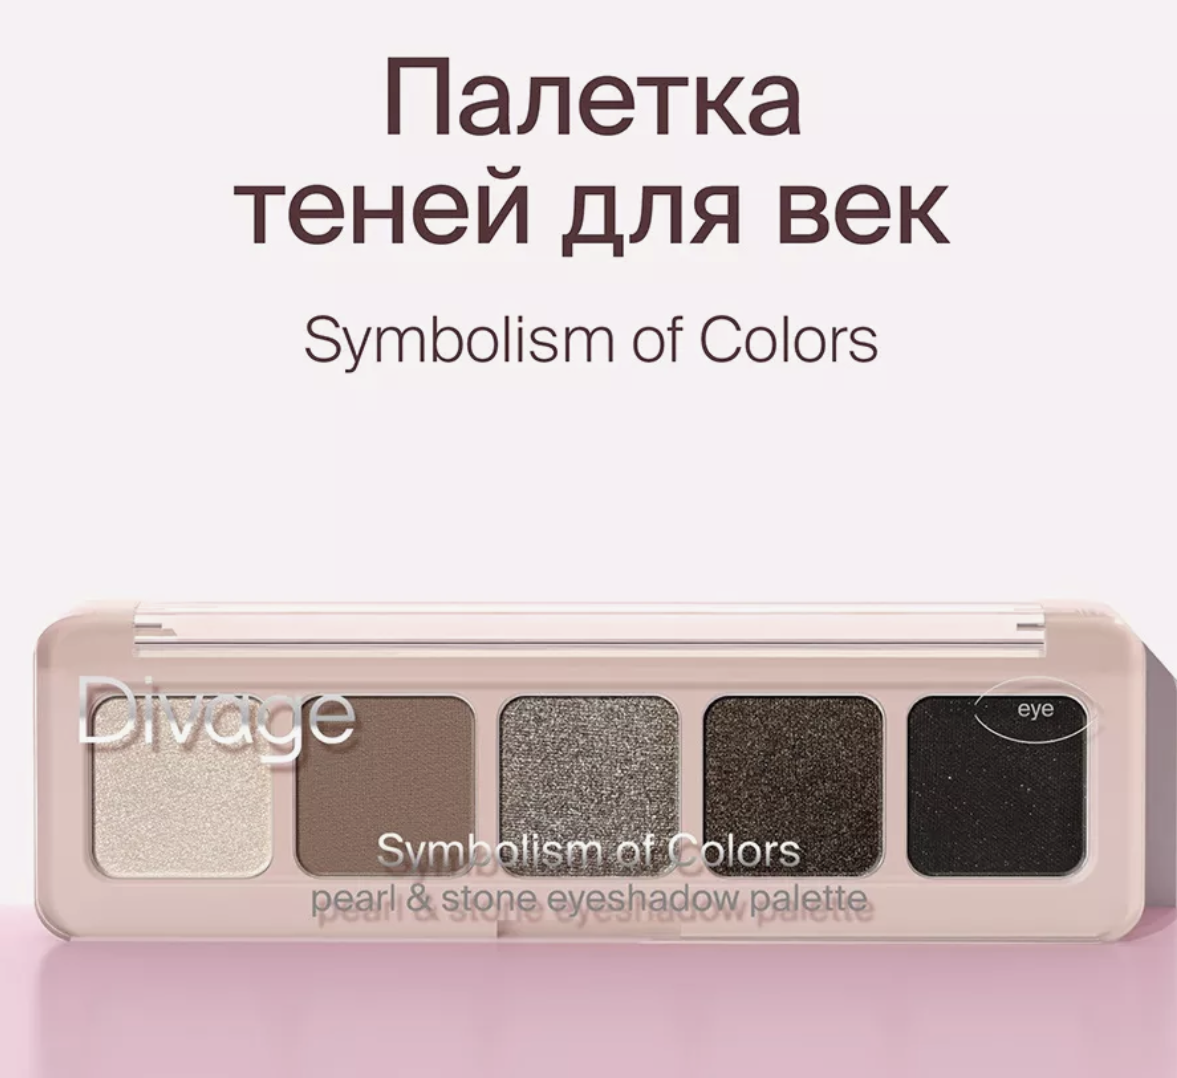   / Divage -     Symbolism of Colors pearl&stone 5,5 